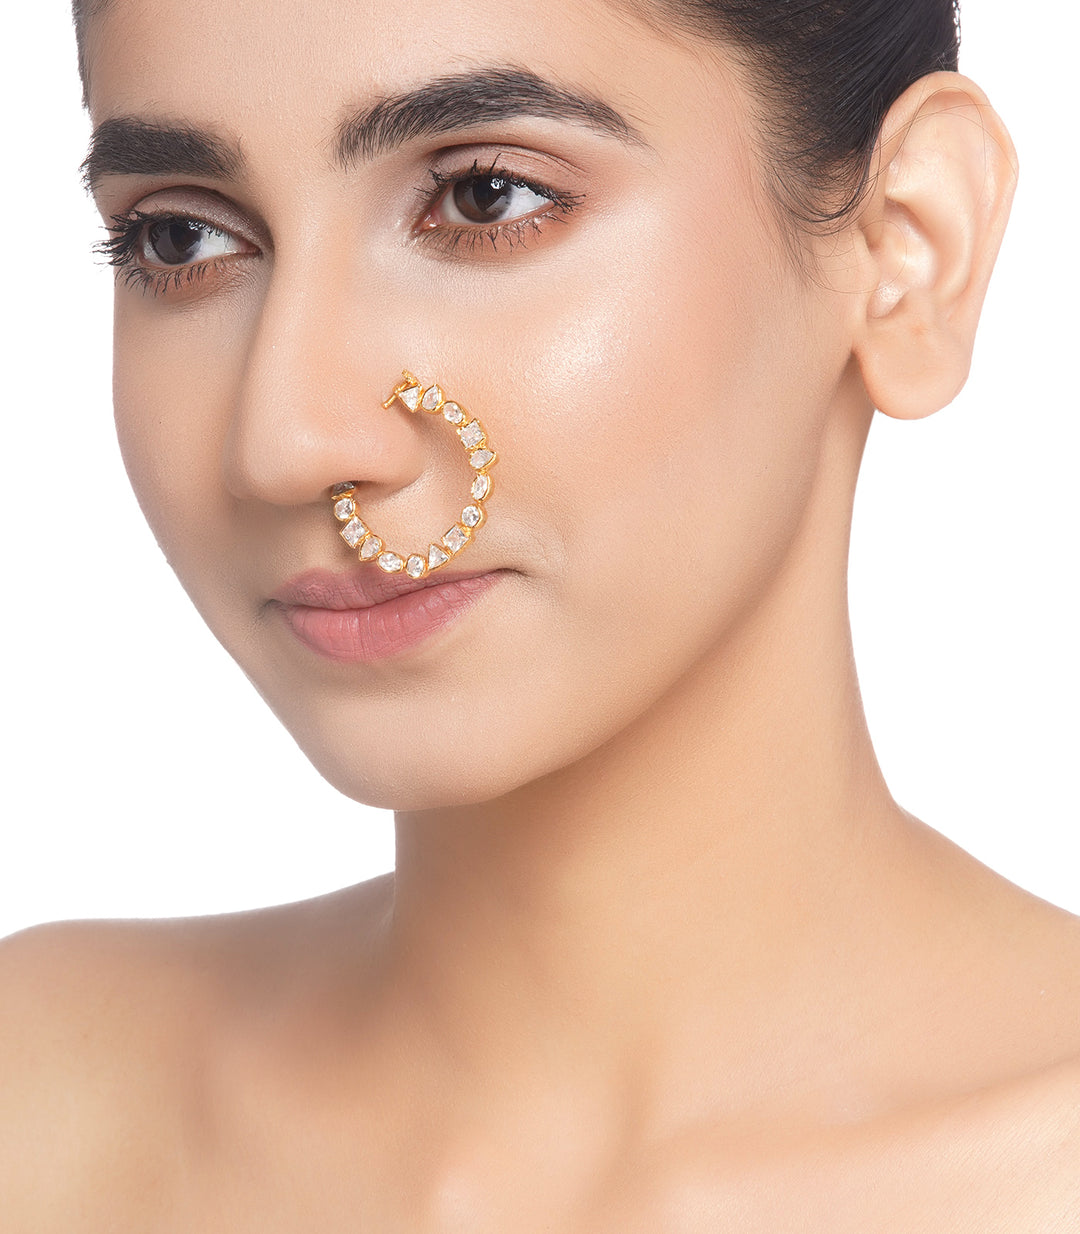 GOLD PLATED CUBIC ZIRCOINIA NOSERING